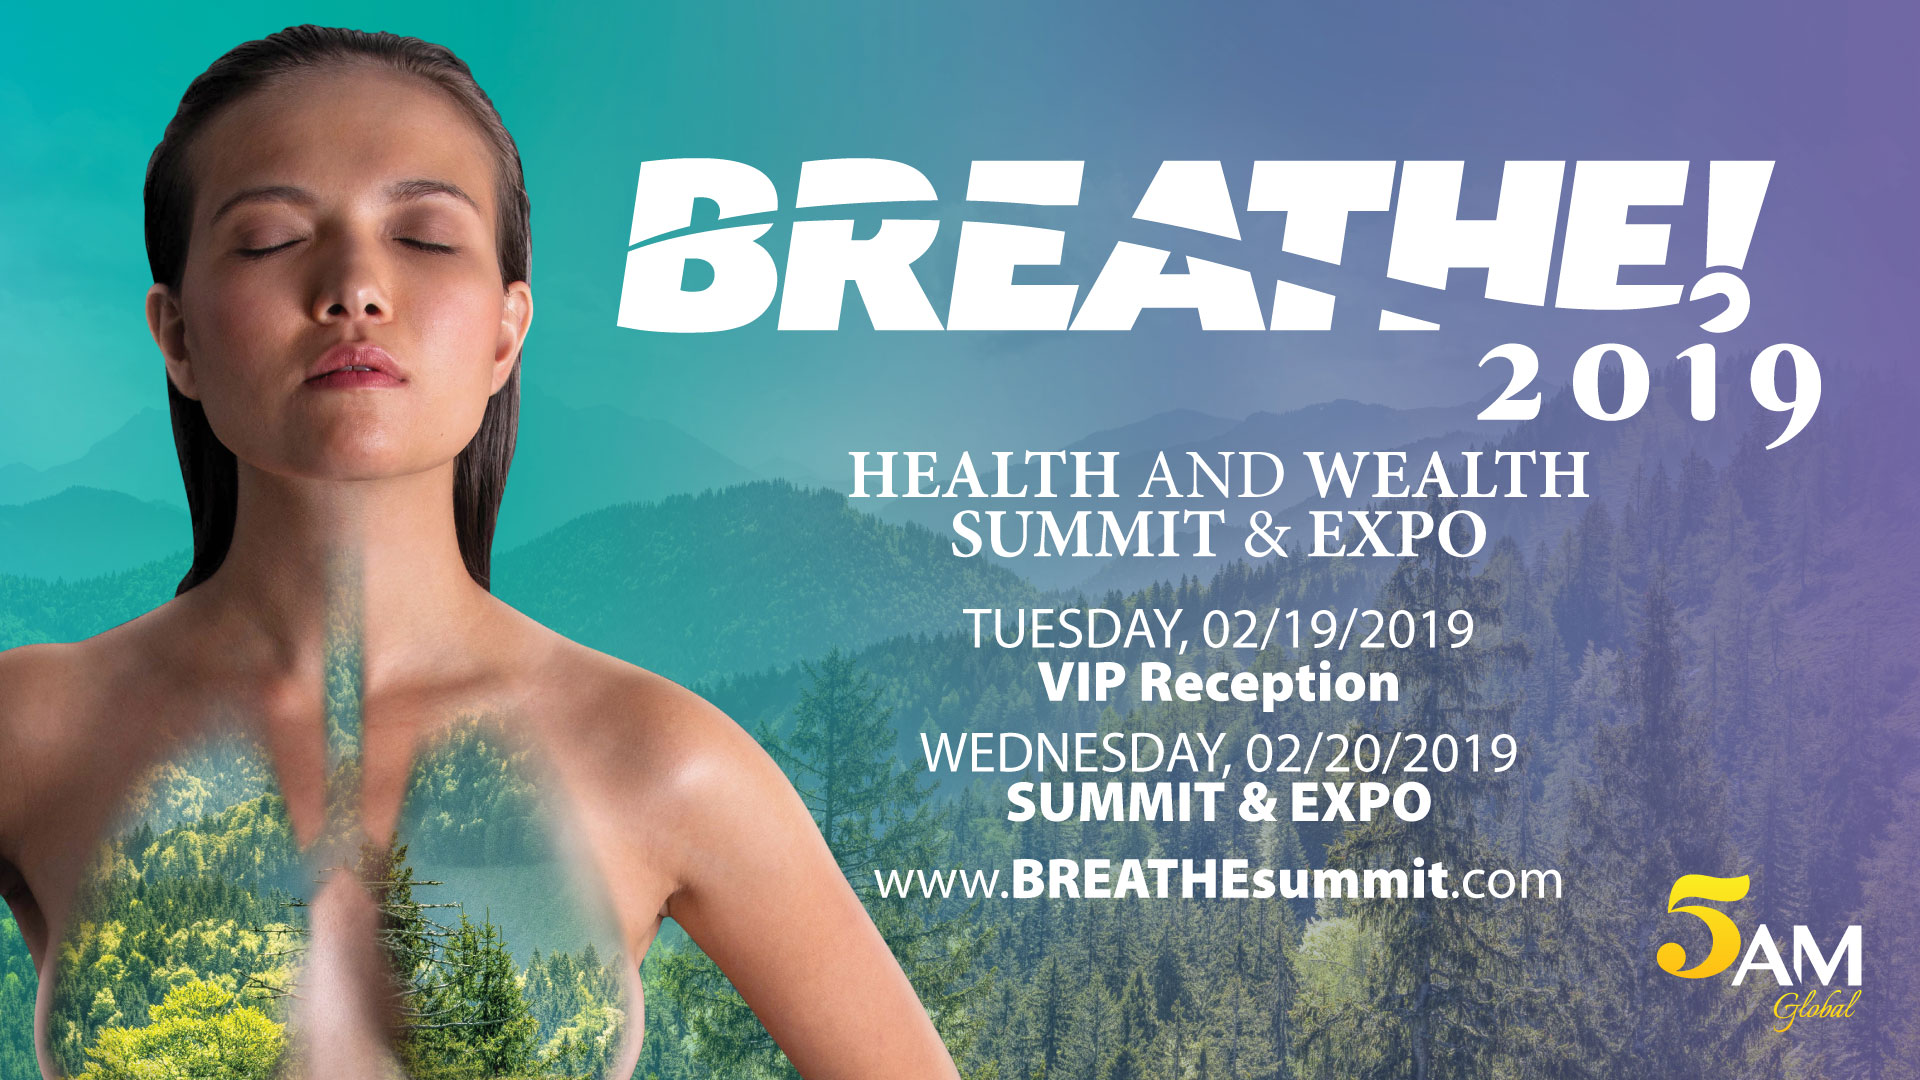 BREATHE! Health and Wealth Summit & Expo